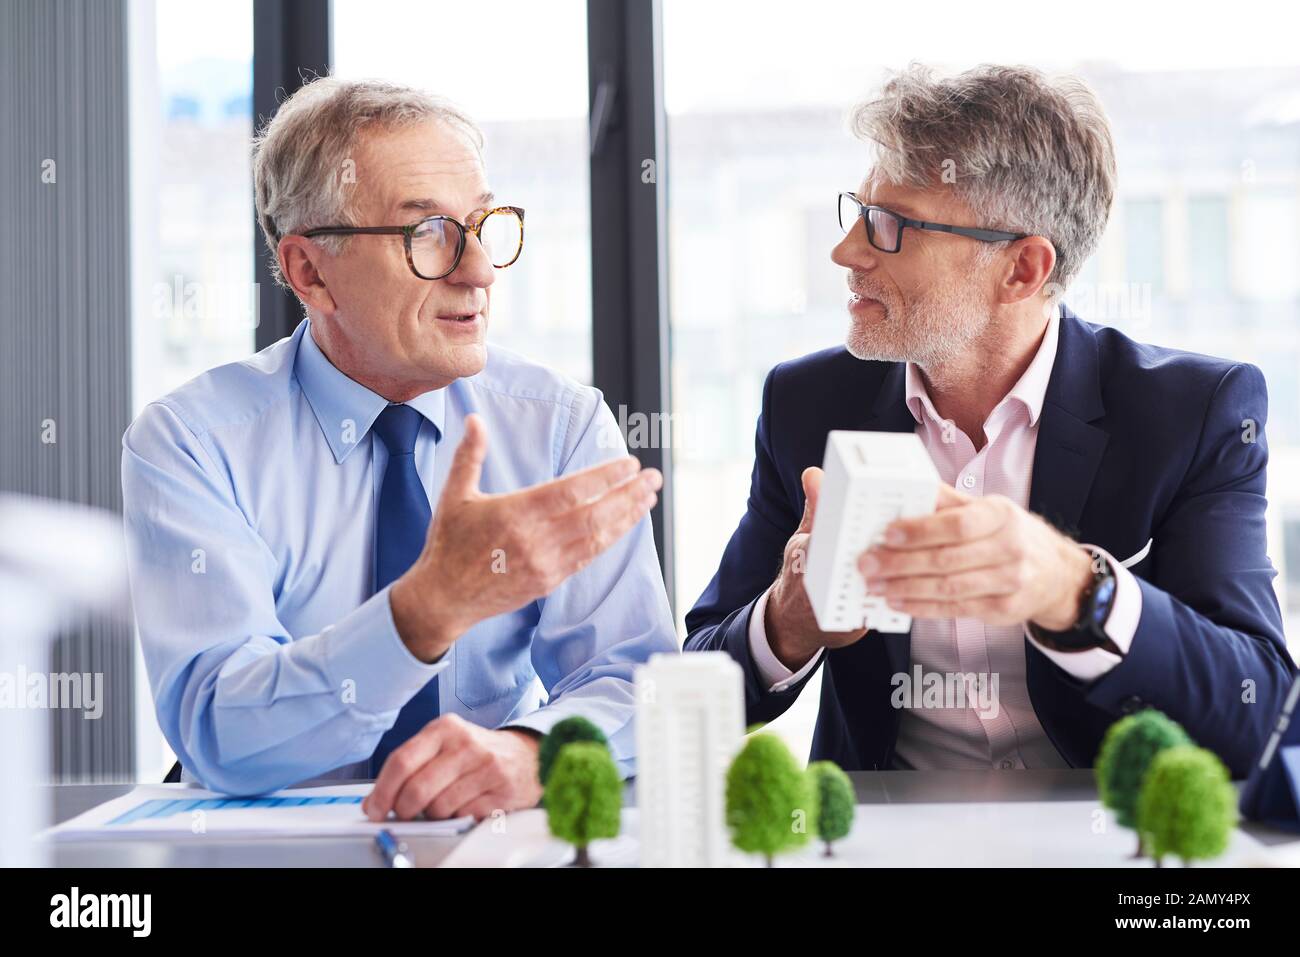 Two mature architects discussing business strategy Stock Photo